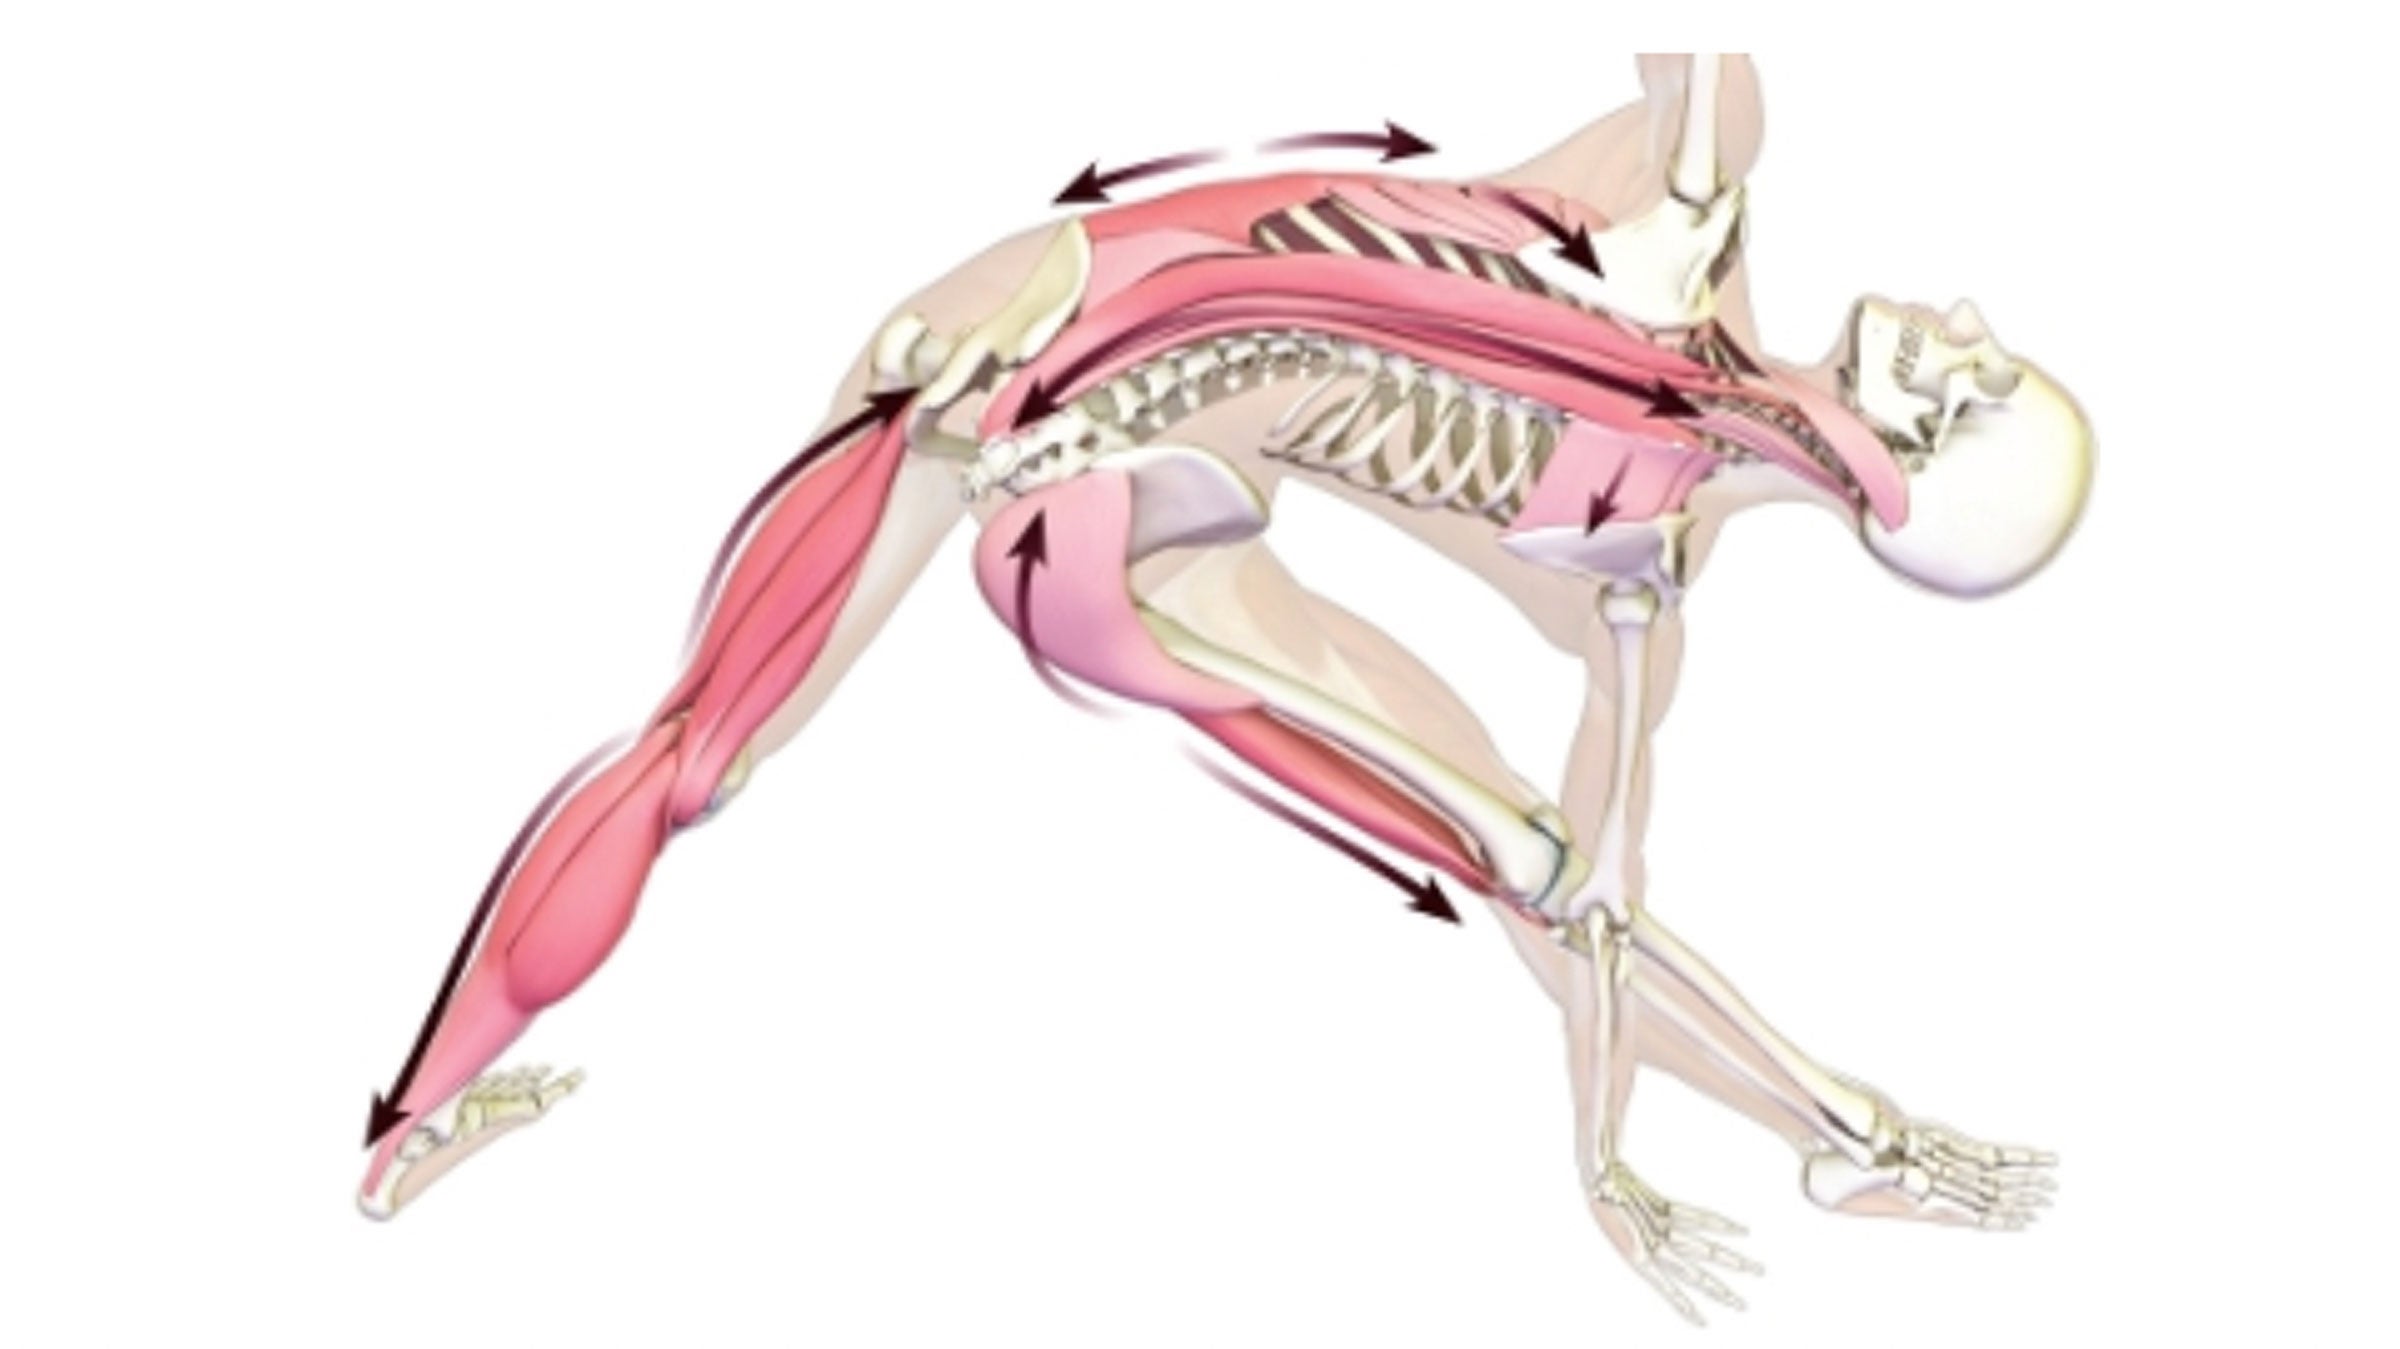 An anatomy illustration shows the body in Extended Triangle Pose